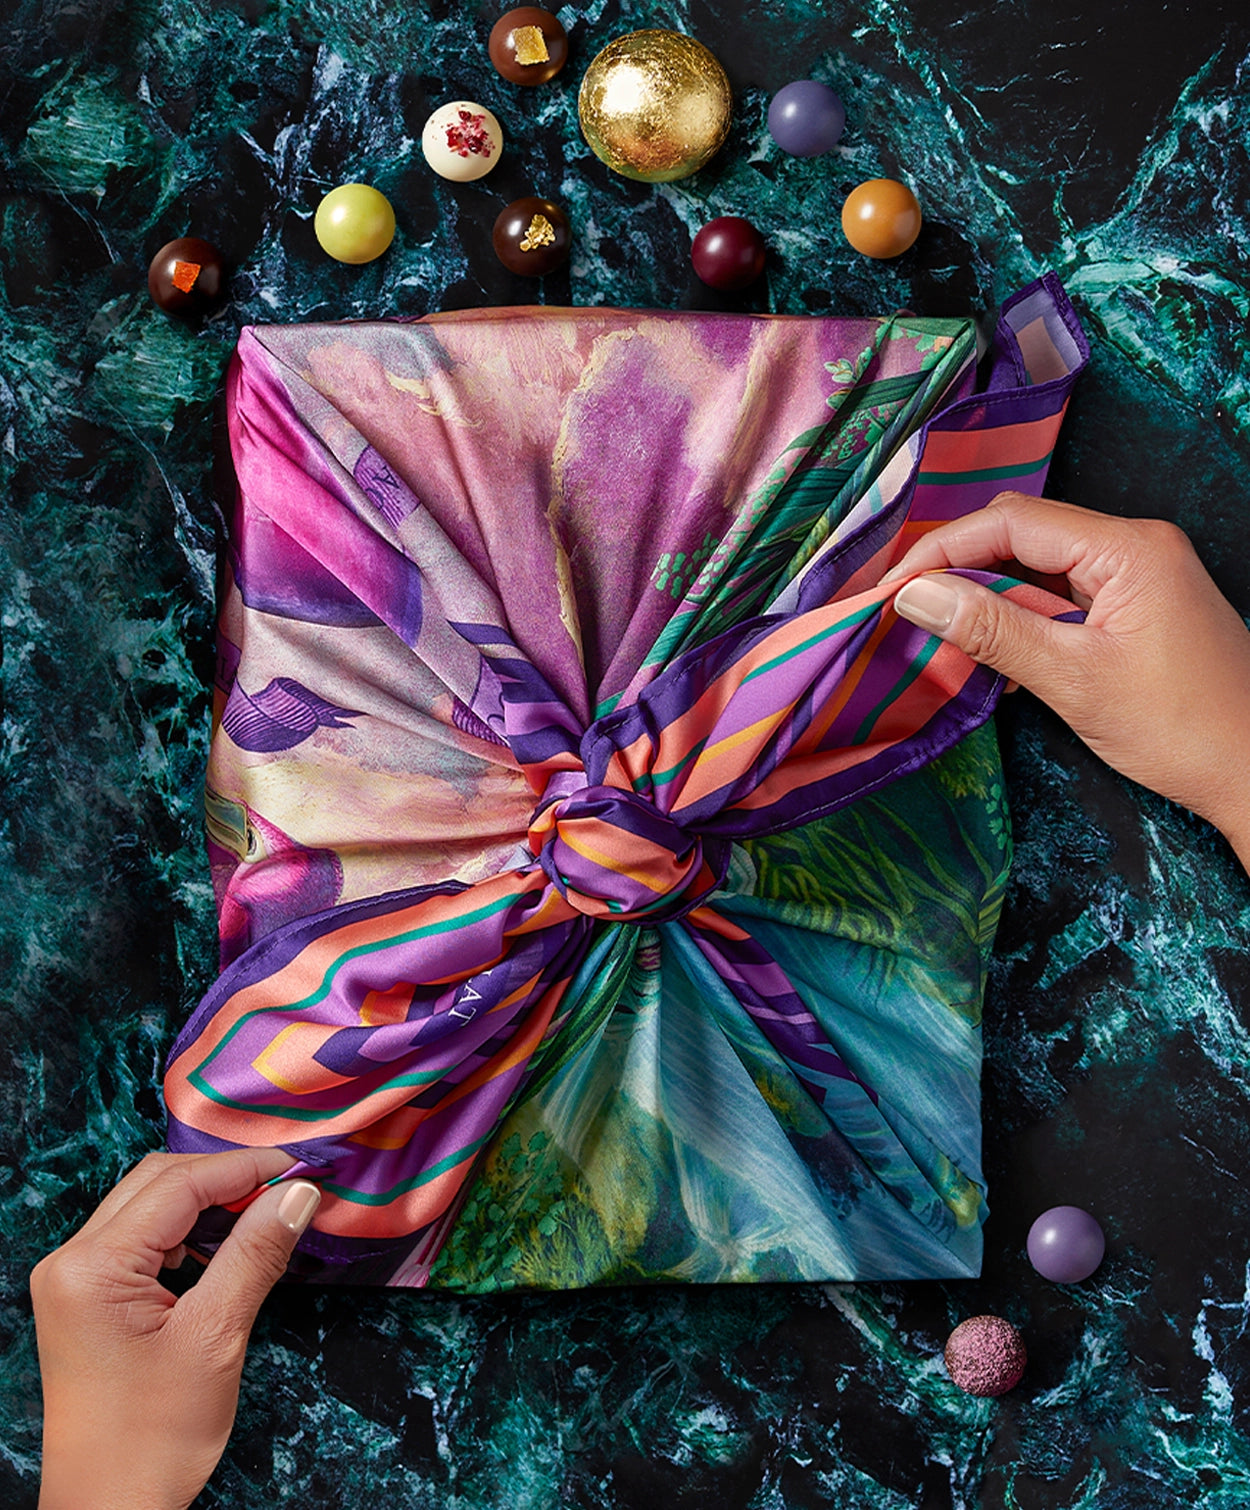 a caucasian woman's hands firmly tie a colorful silk scarf around a rectangular chocolate box on a green marble background/